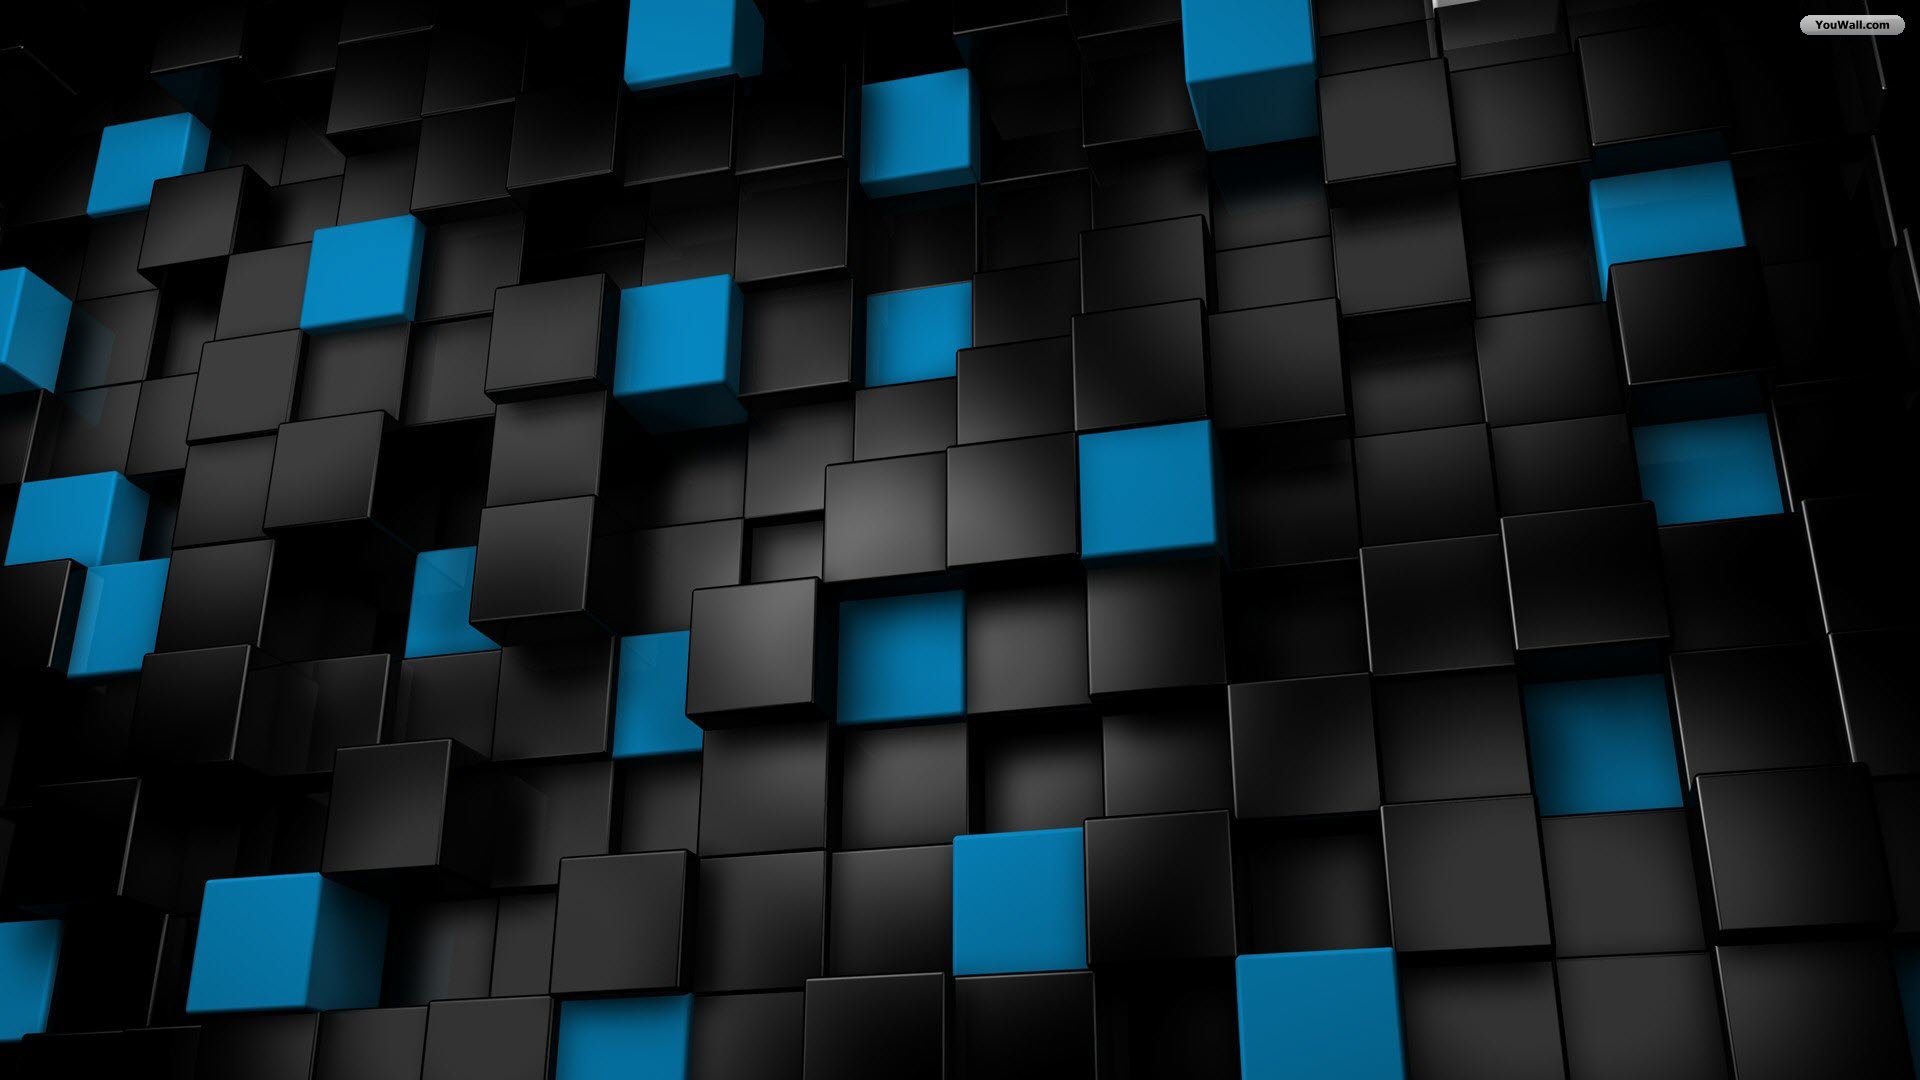 Download Black And Blue Cubes Wallpaper Full HD Wallpapers 1920x1080